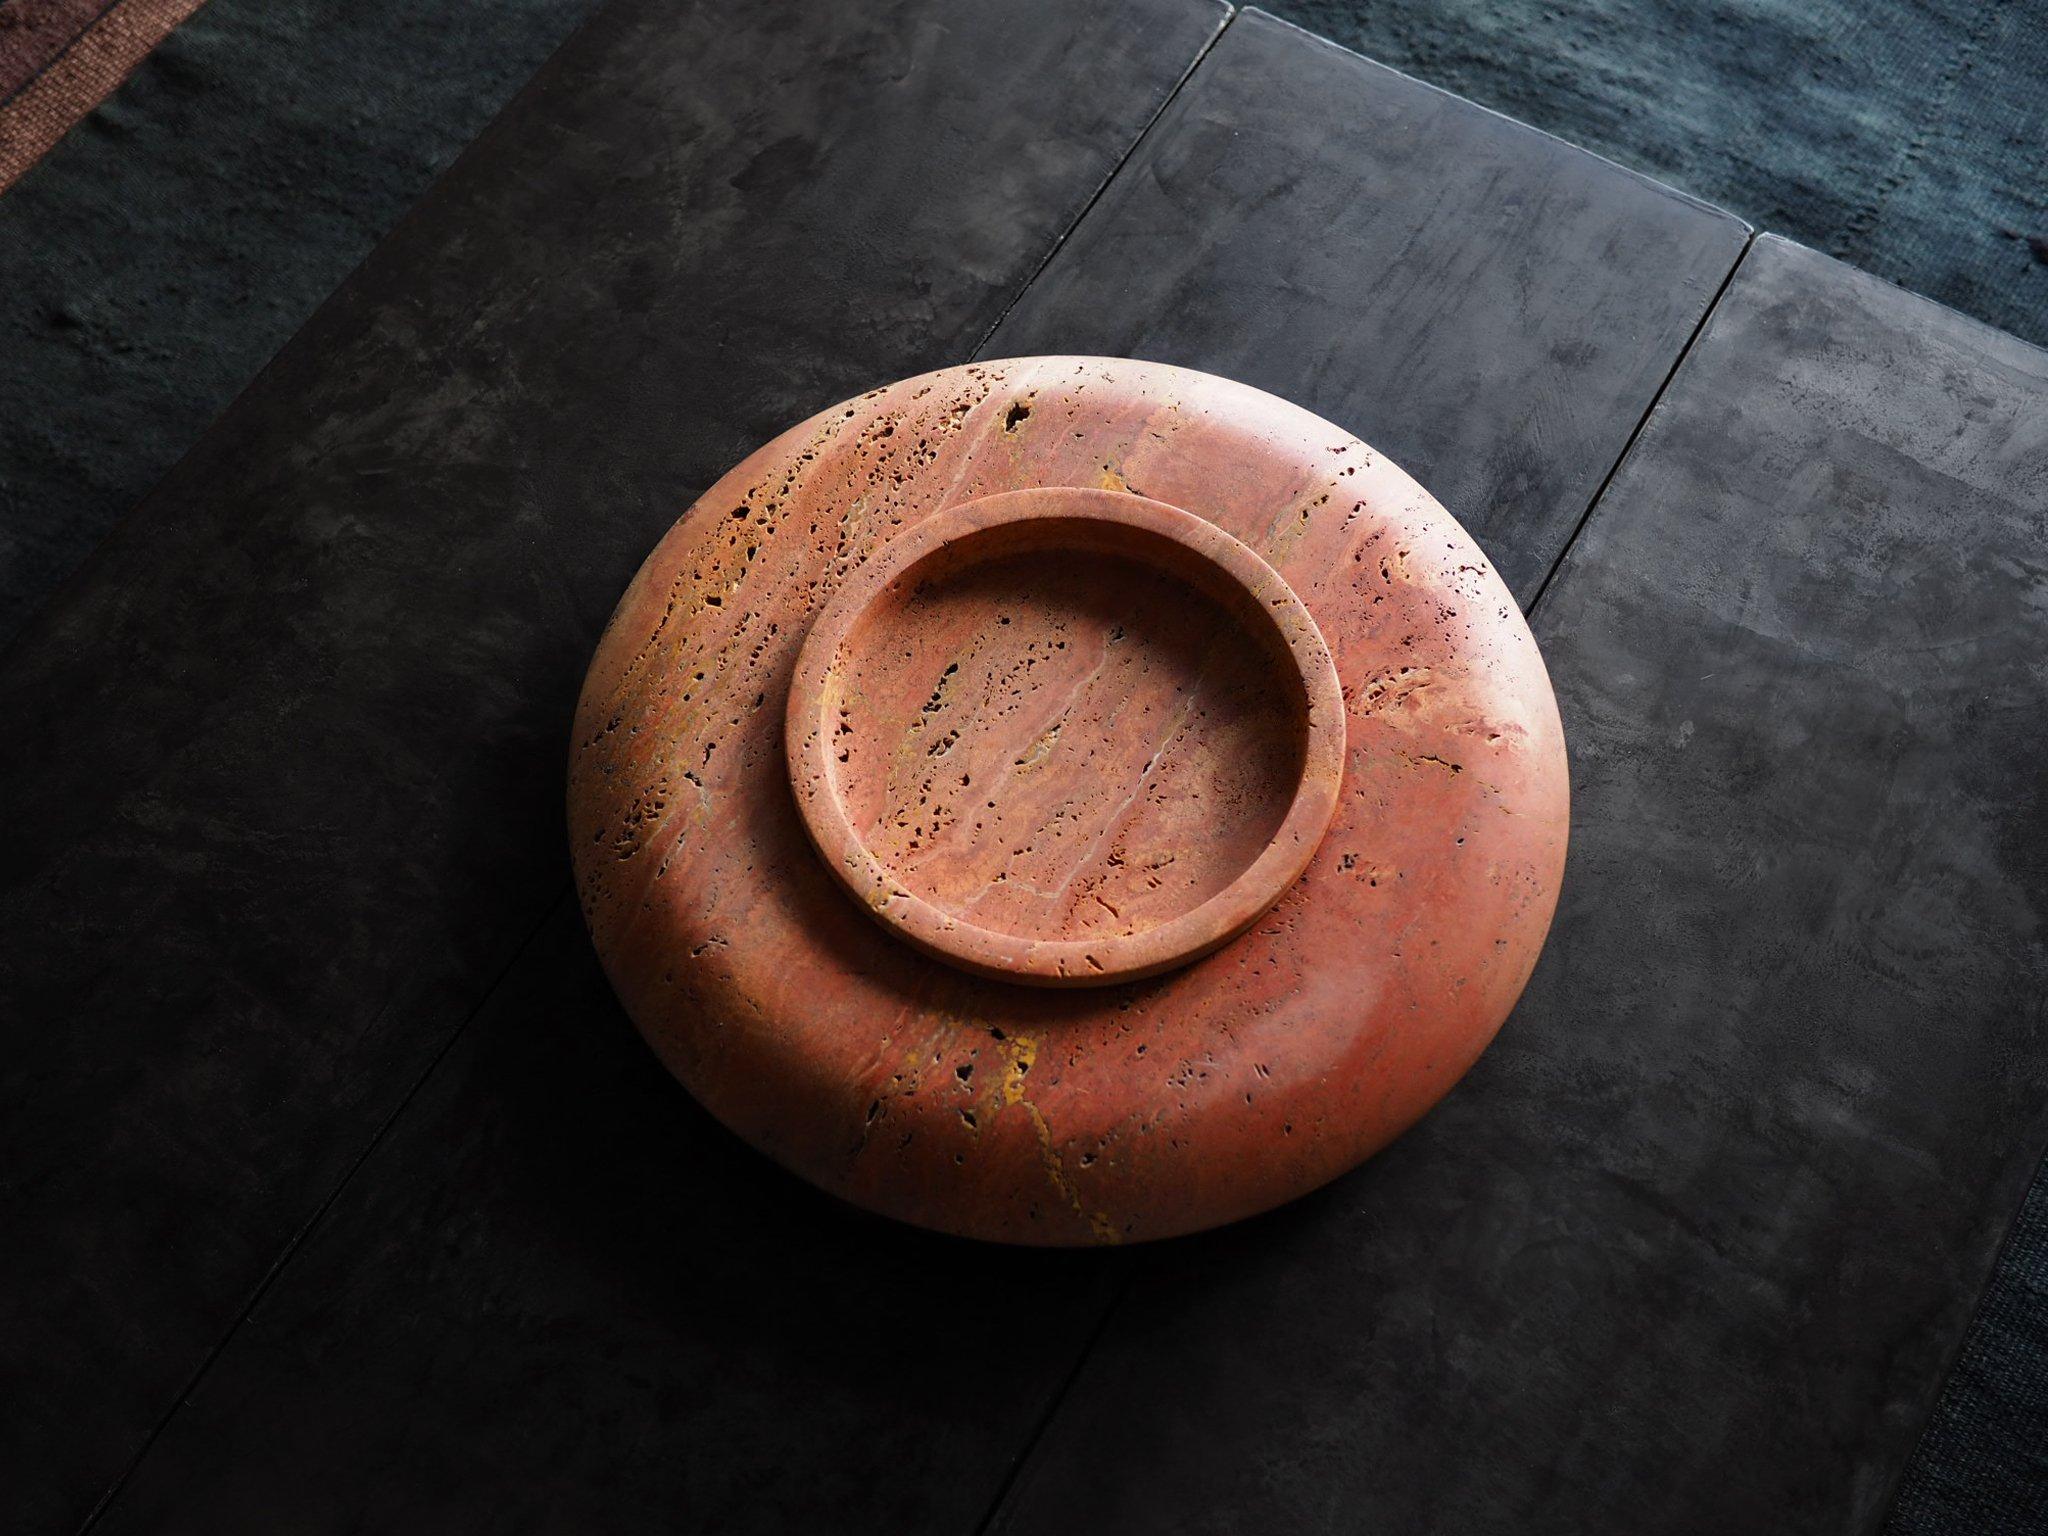 The Stieglitz vessel, a natural stone heirloom in unfilled travertine. A low-slung sculptural form of two components, vessel & bowl. The finish is left unfilled, celebrating the beauty & porosity of the natural stone. The most desirable pieces